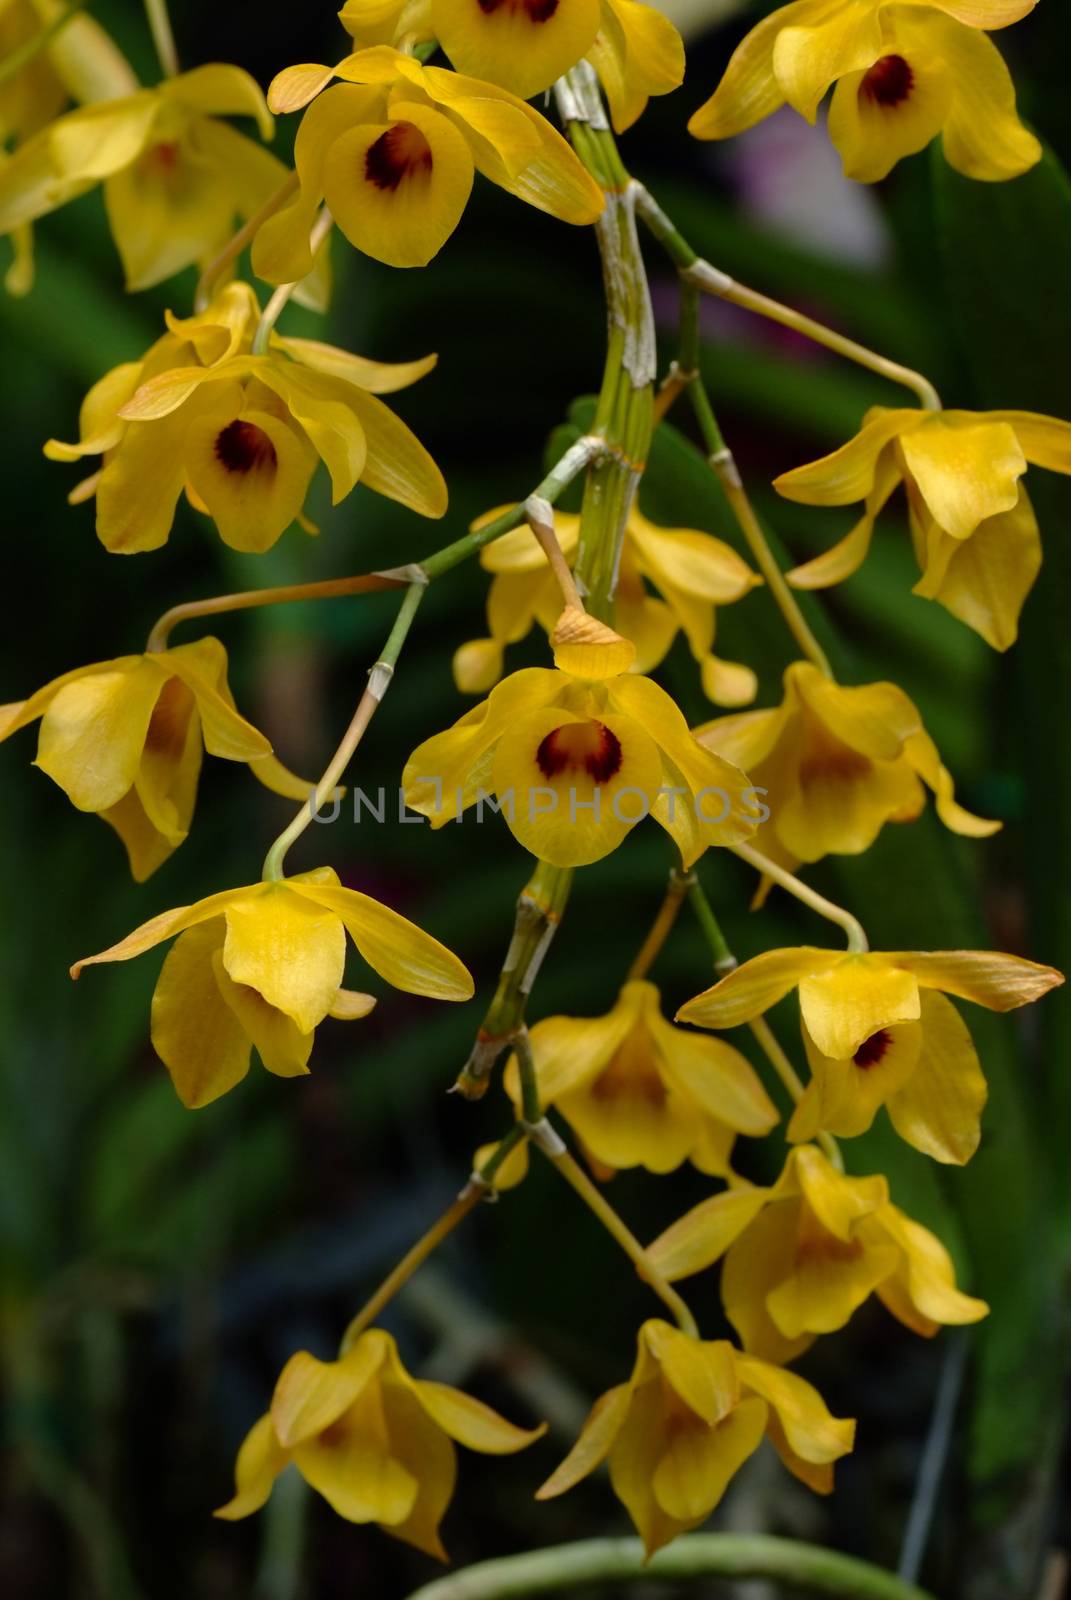 Dendrobium densiflorum,  is a species of epiphytic or lithophytic orchid that is native to Asia. It has club-shaped stems, three or four leathery leaves and densely flowered